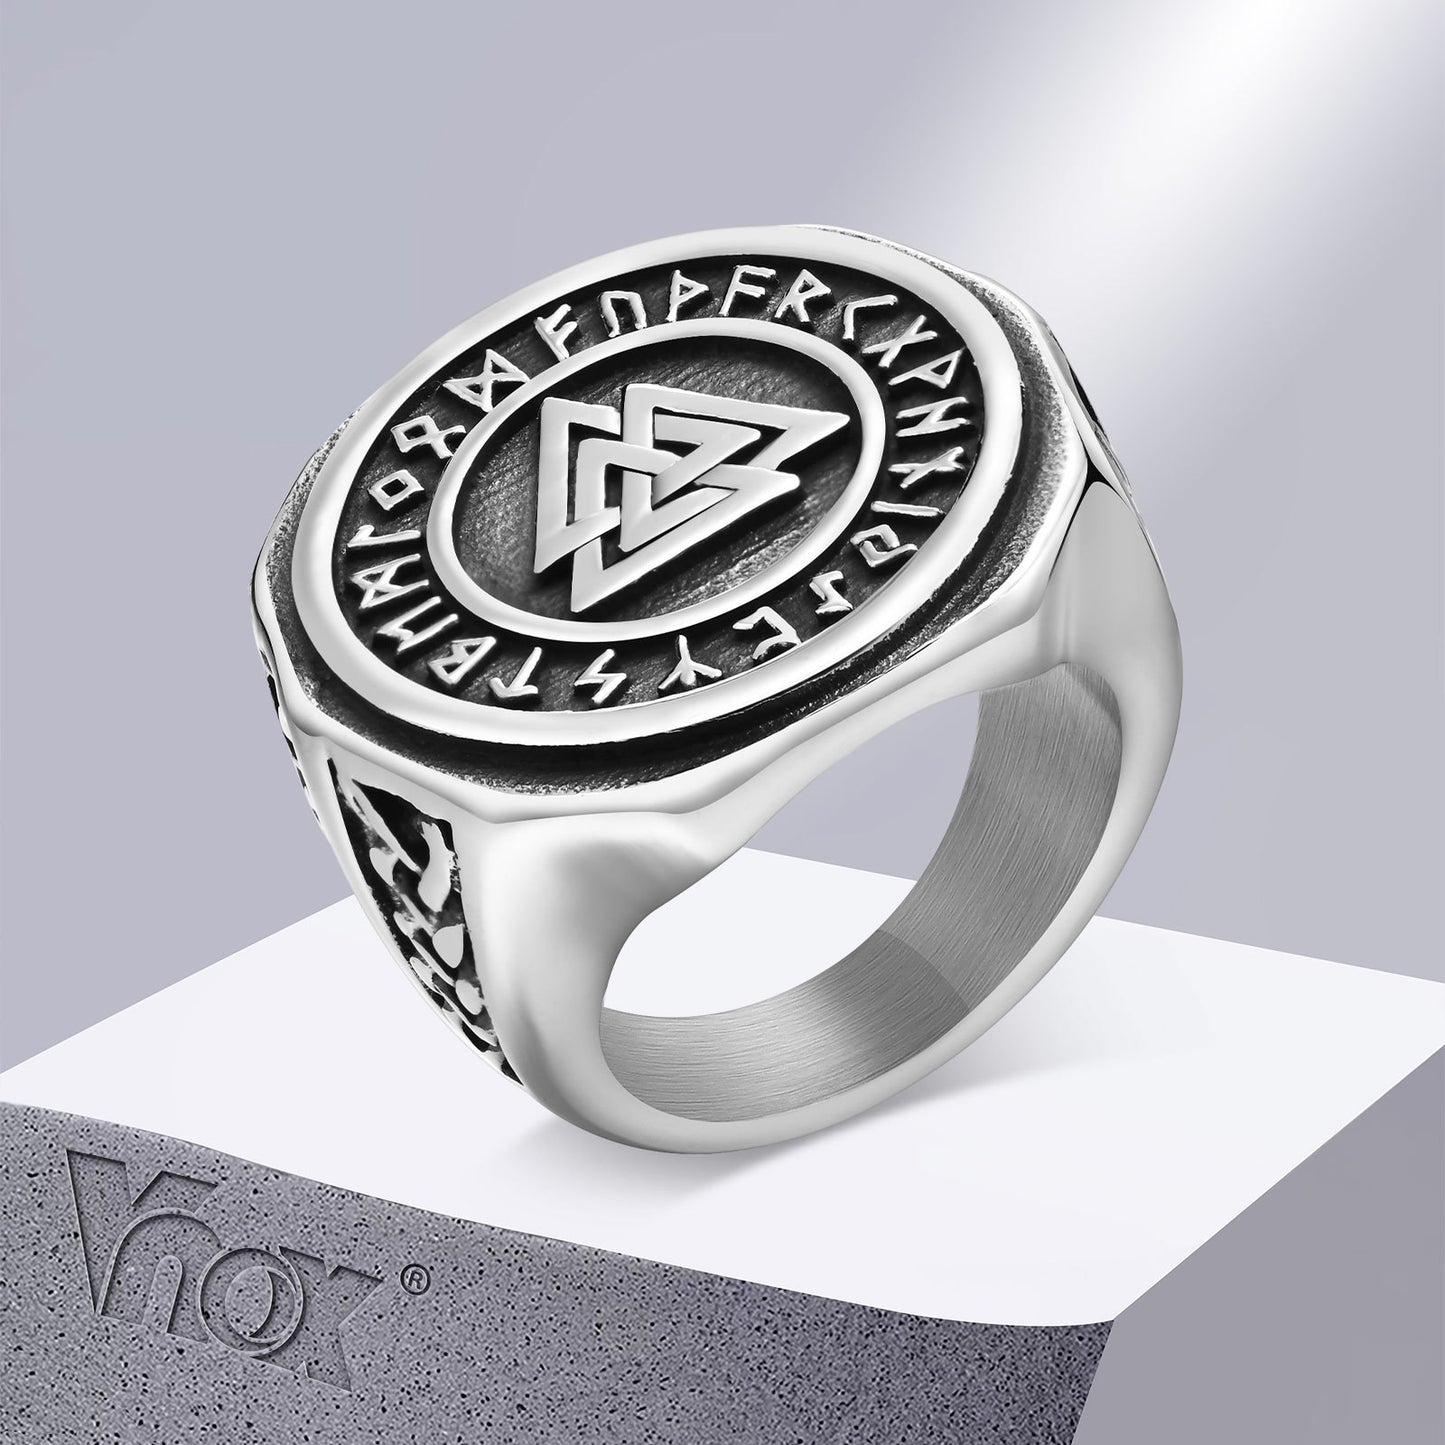 Vnox 23mm Viking Signet Ring for Men, Chunky Bold Stainless Steel Round Top Finger Band, Nordic Viking Knot Rune Almut Jewelry